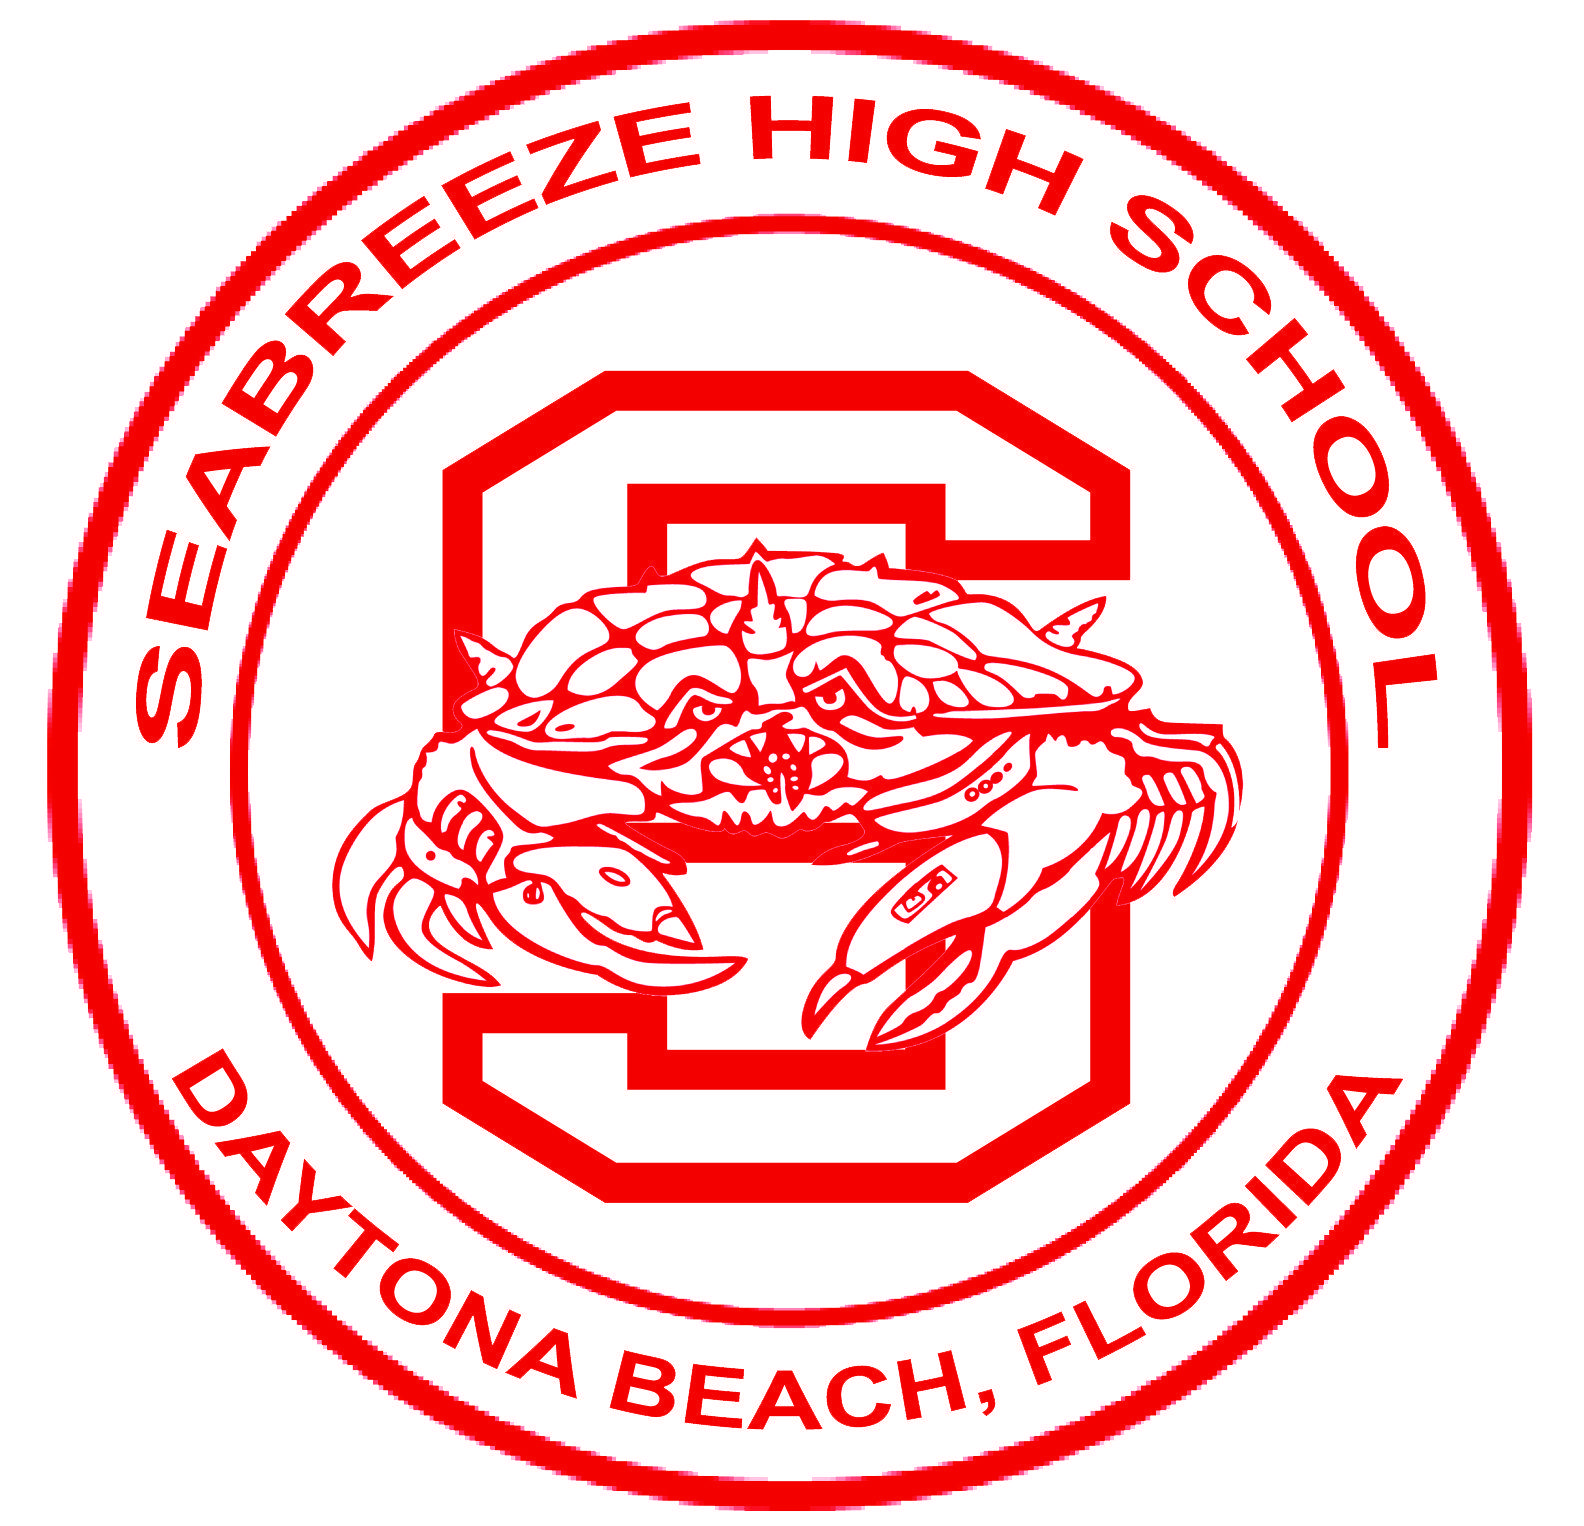 Looks Like in a Red Circle Logo - Sandcrab logos - Seabreeze High School